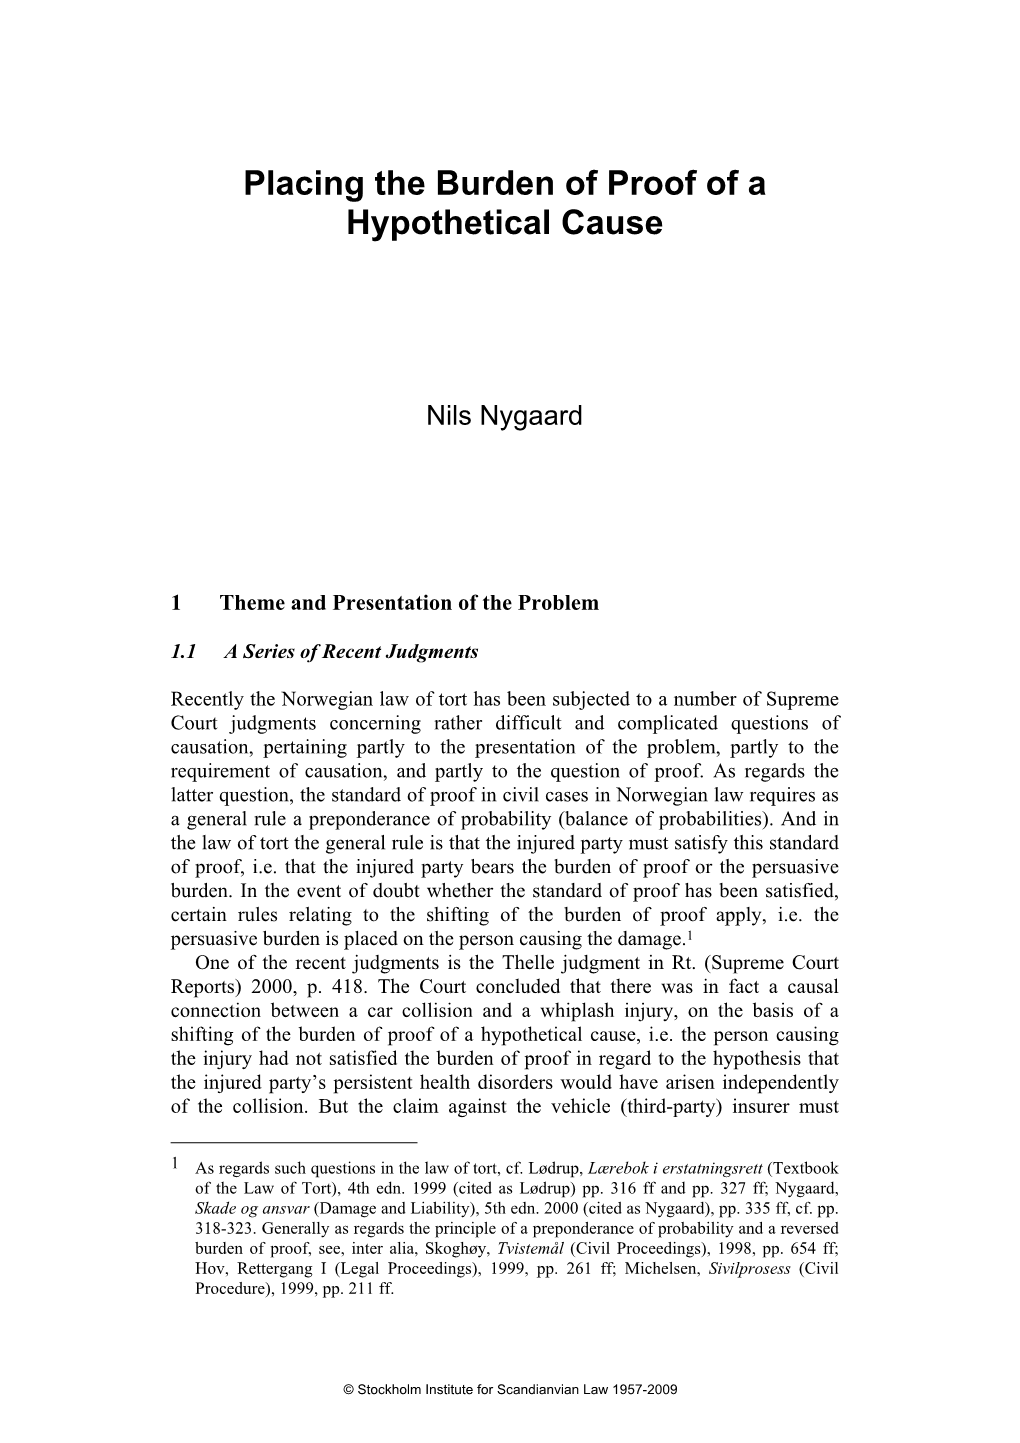 Placing the Burden of Proof of a Hypothetical Cause